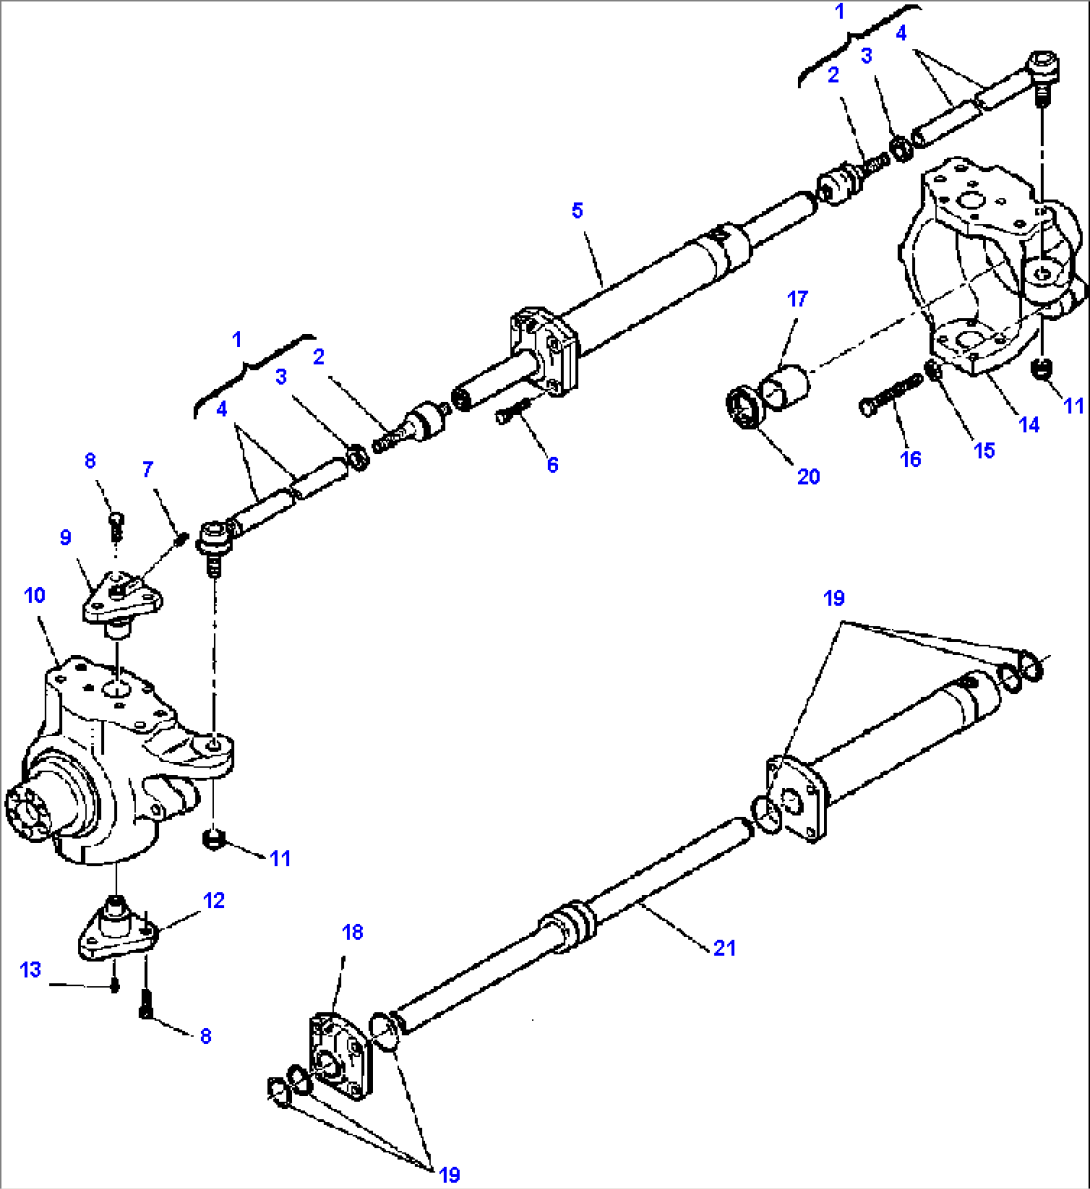 FIG. F3405-01A0 FRONT AXLE (4WD) - STEERING ARM